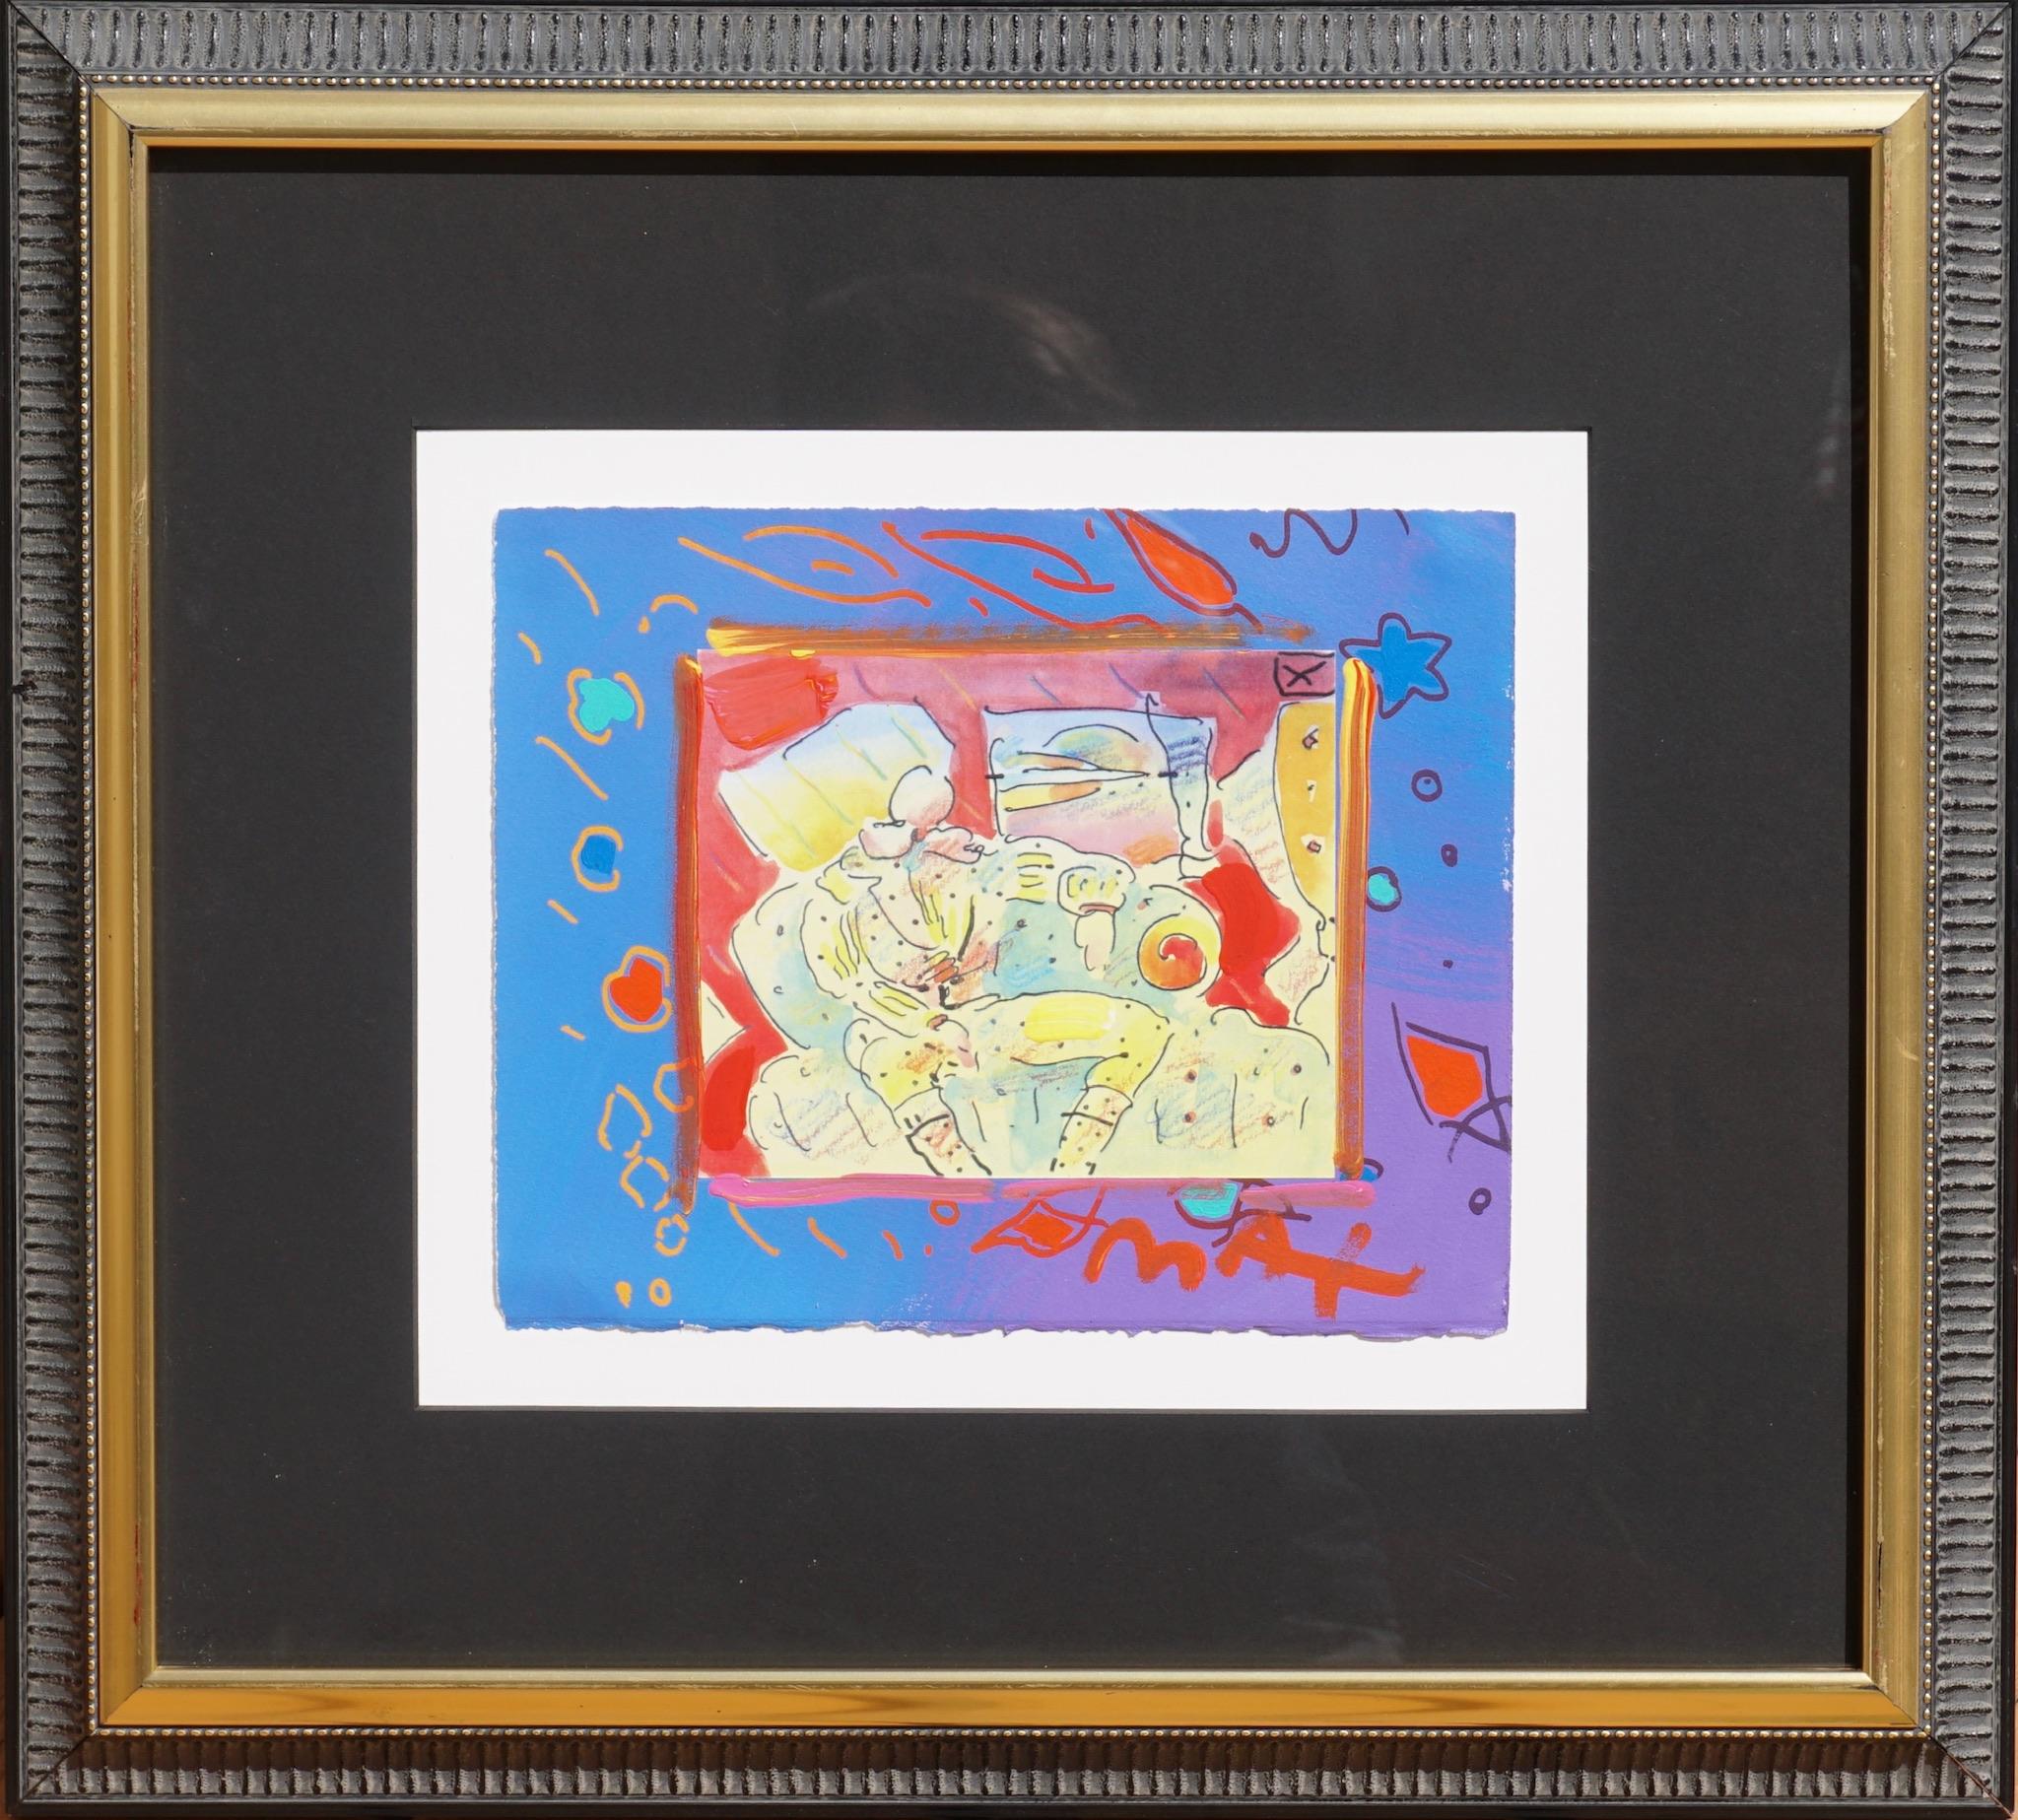 Peter Max (American, b.1937) “gent on sofa” 1996 Overpaint 
signed “Max” (lower right).
A unique variation. Peter Max studio stamp on verso.

Excellent condition

Measures: Artwork: 8.5 x 10.5 inches.
Framed: 19 x 21 inches.

Max's art work